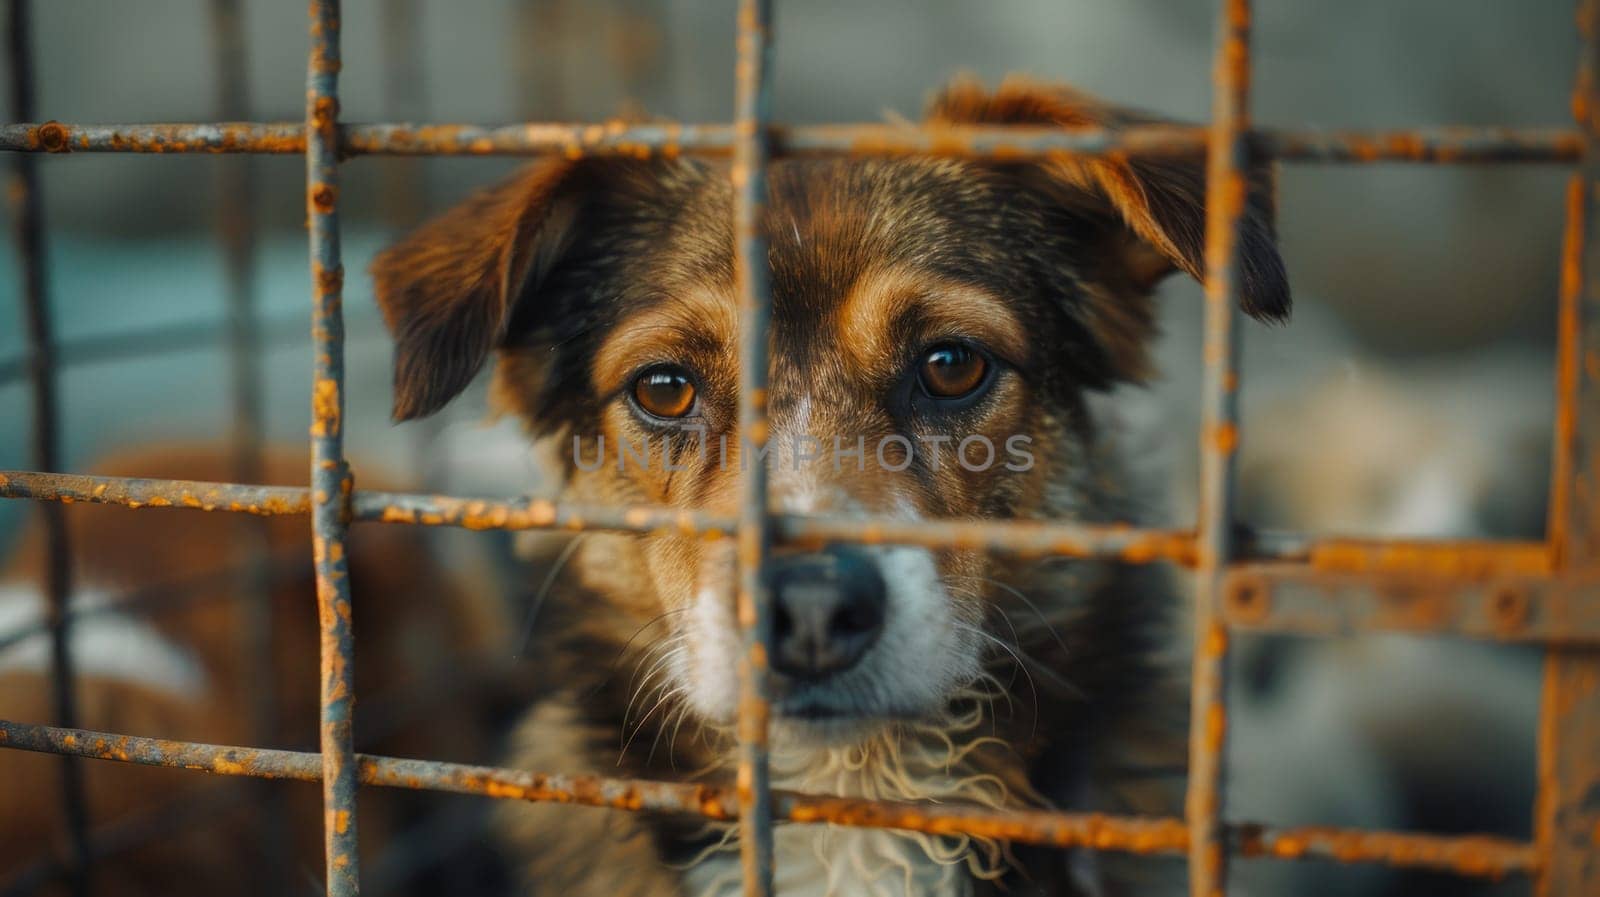 A dog is looking through a metal fence.